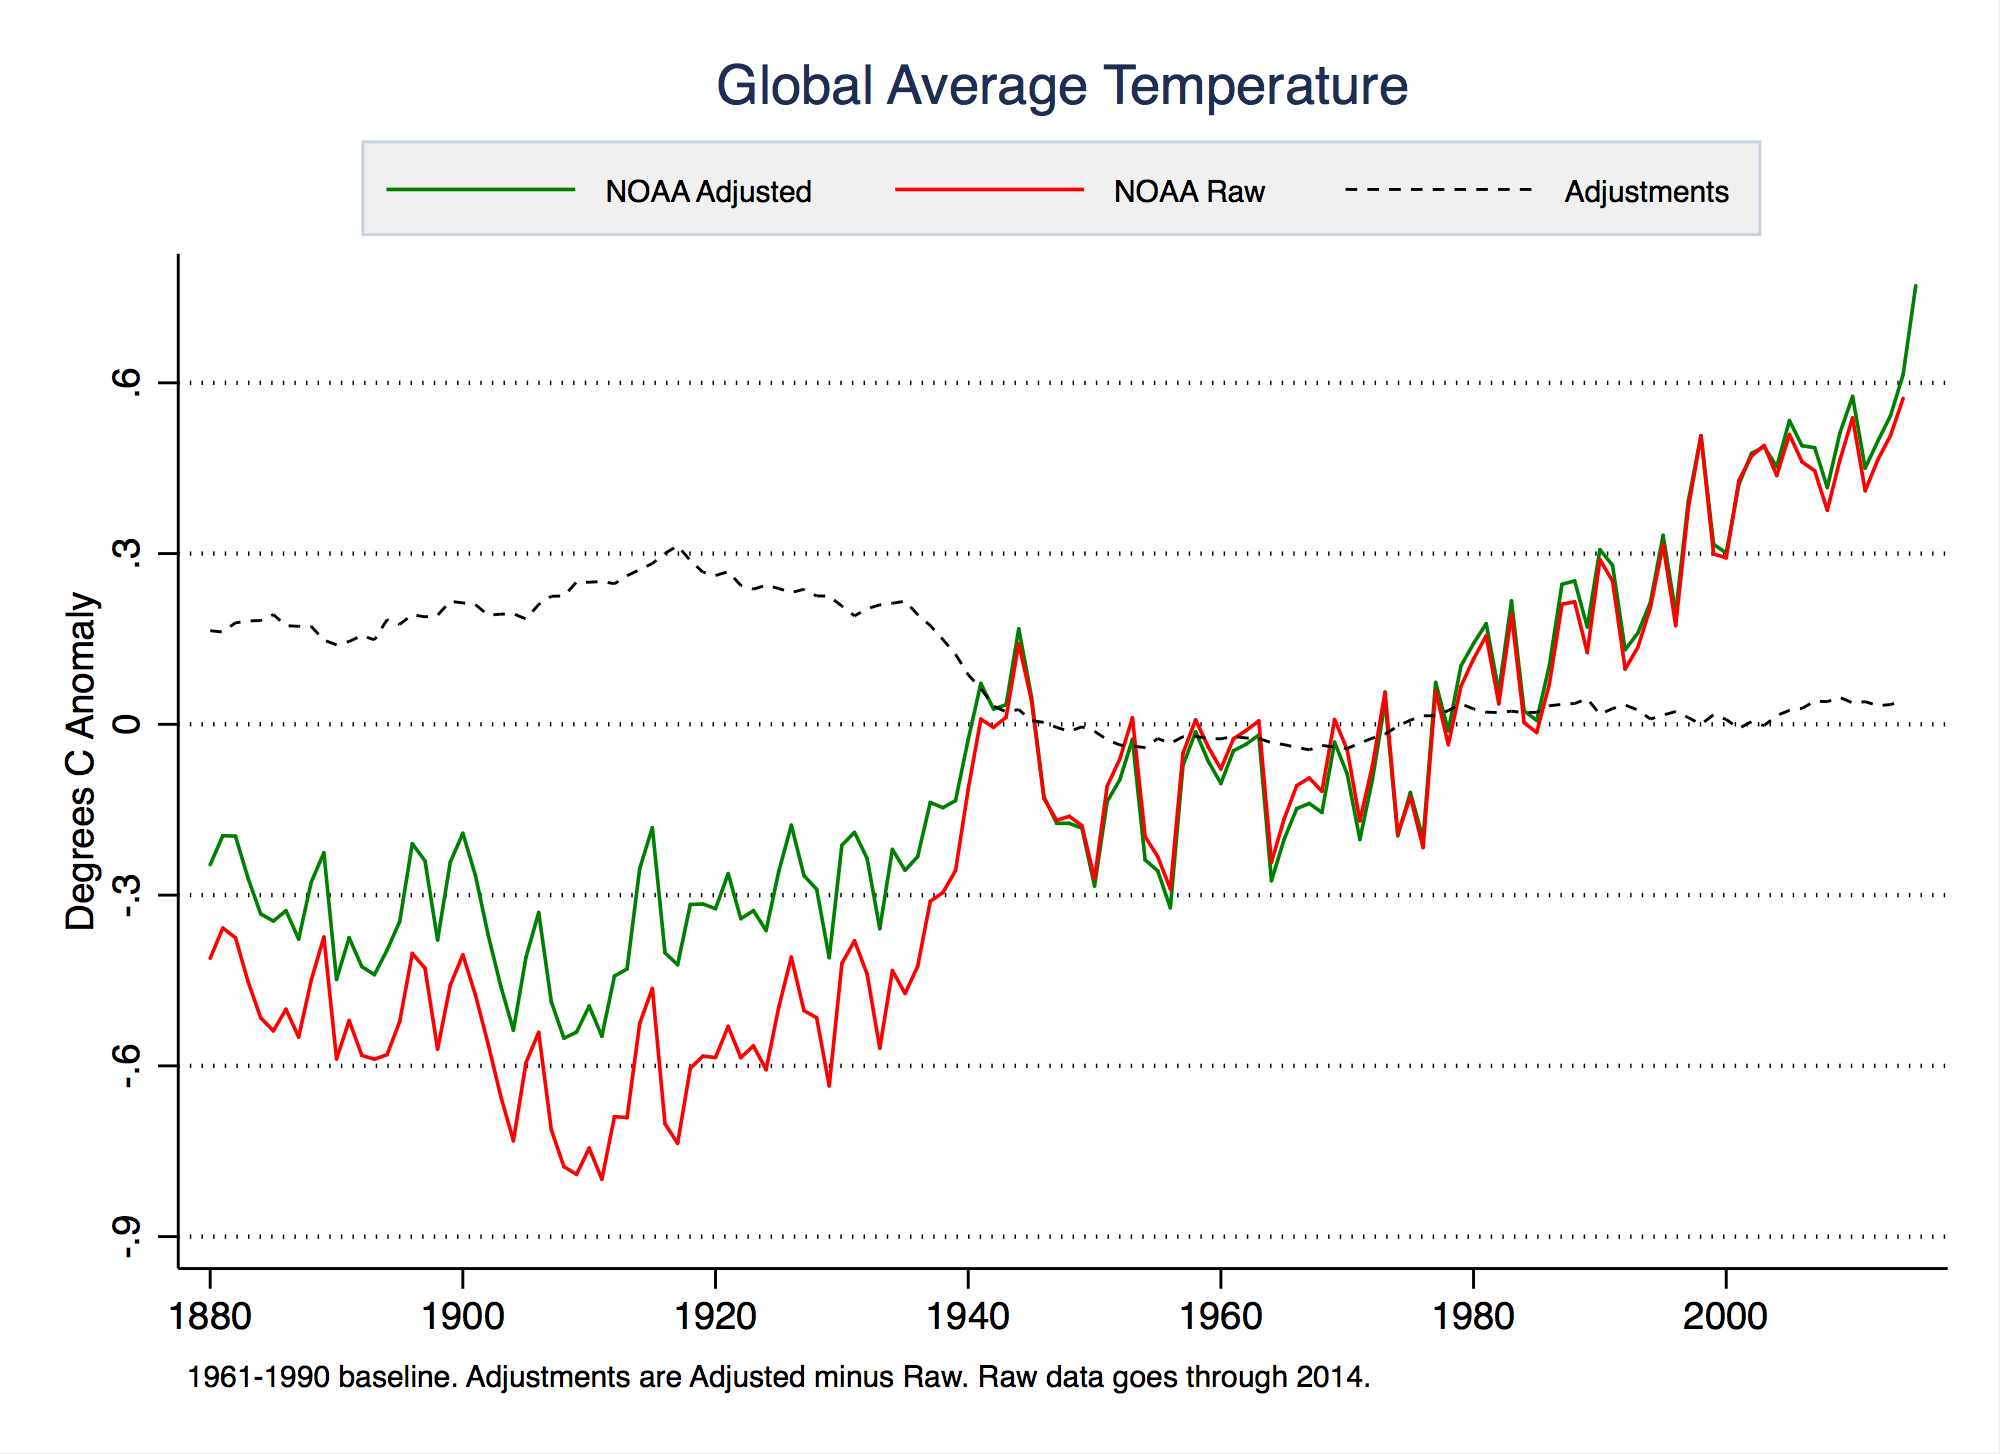 Raw and Adjusted NOAA Global Temperatures